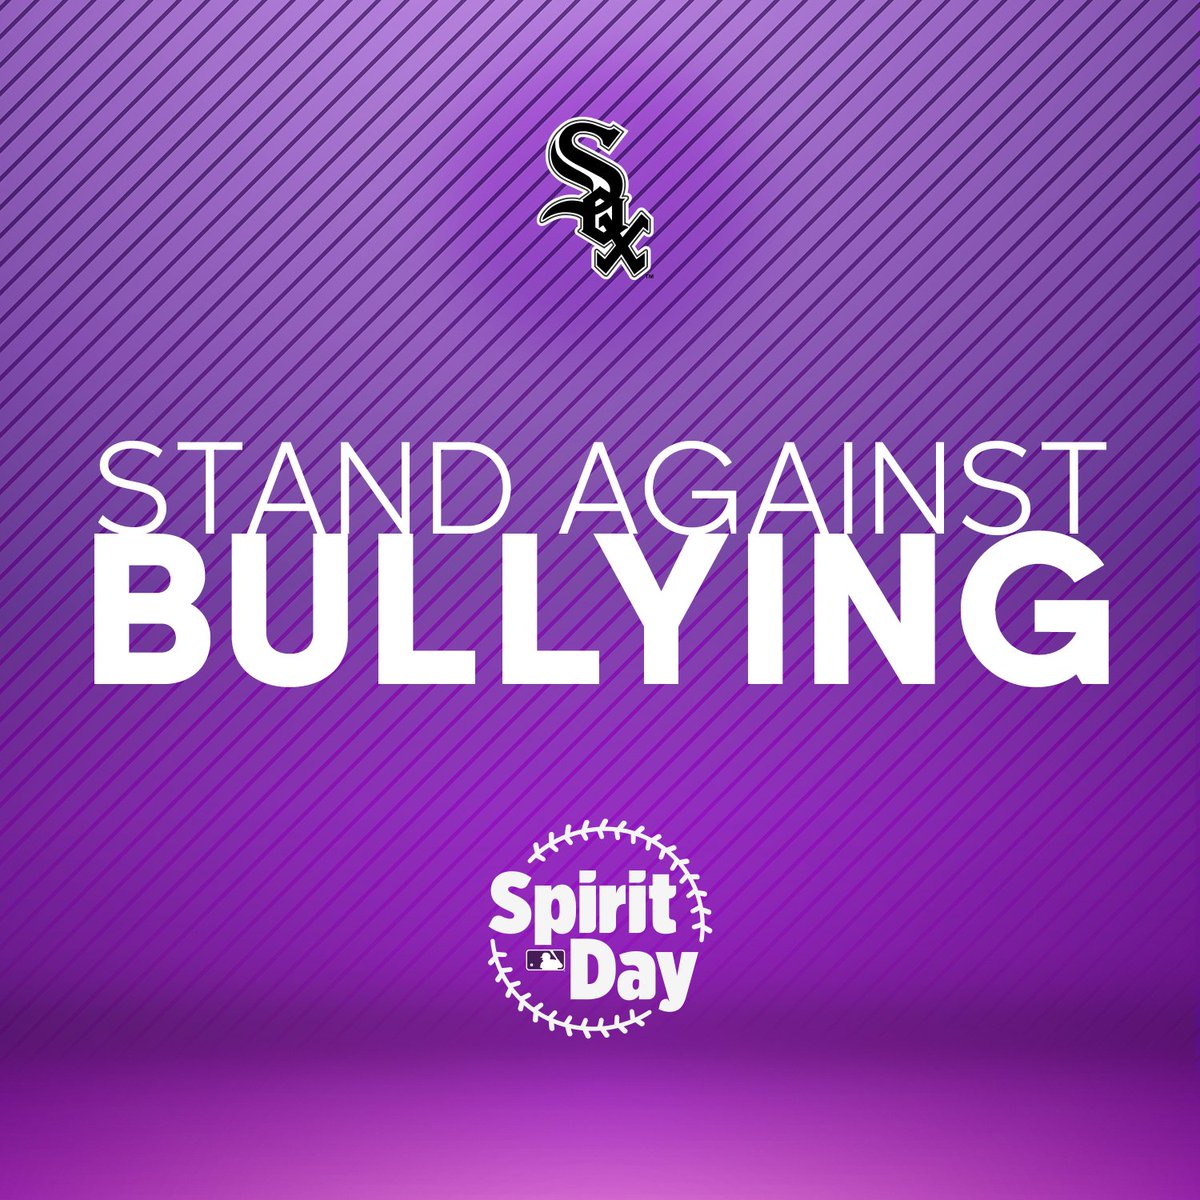 Today and every day, we take a stand to support LGBTQ youth and guard against bullying. #SpiritDay